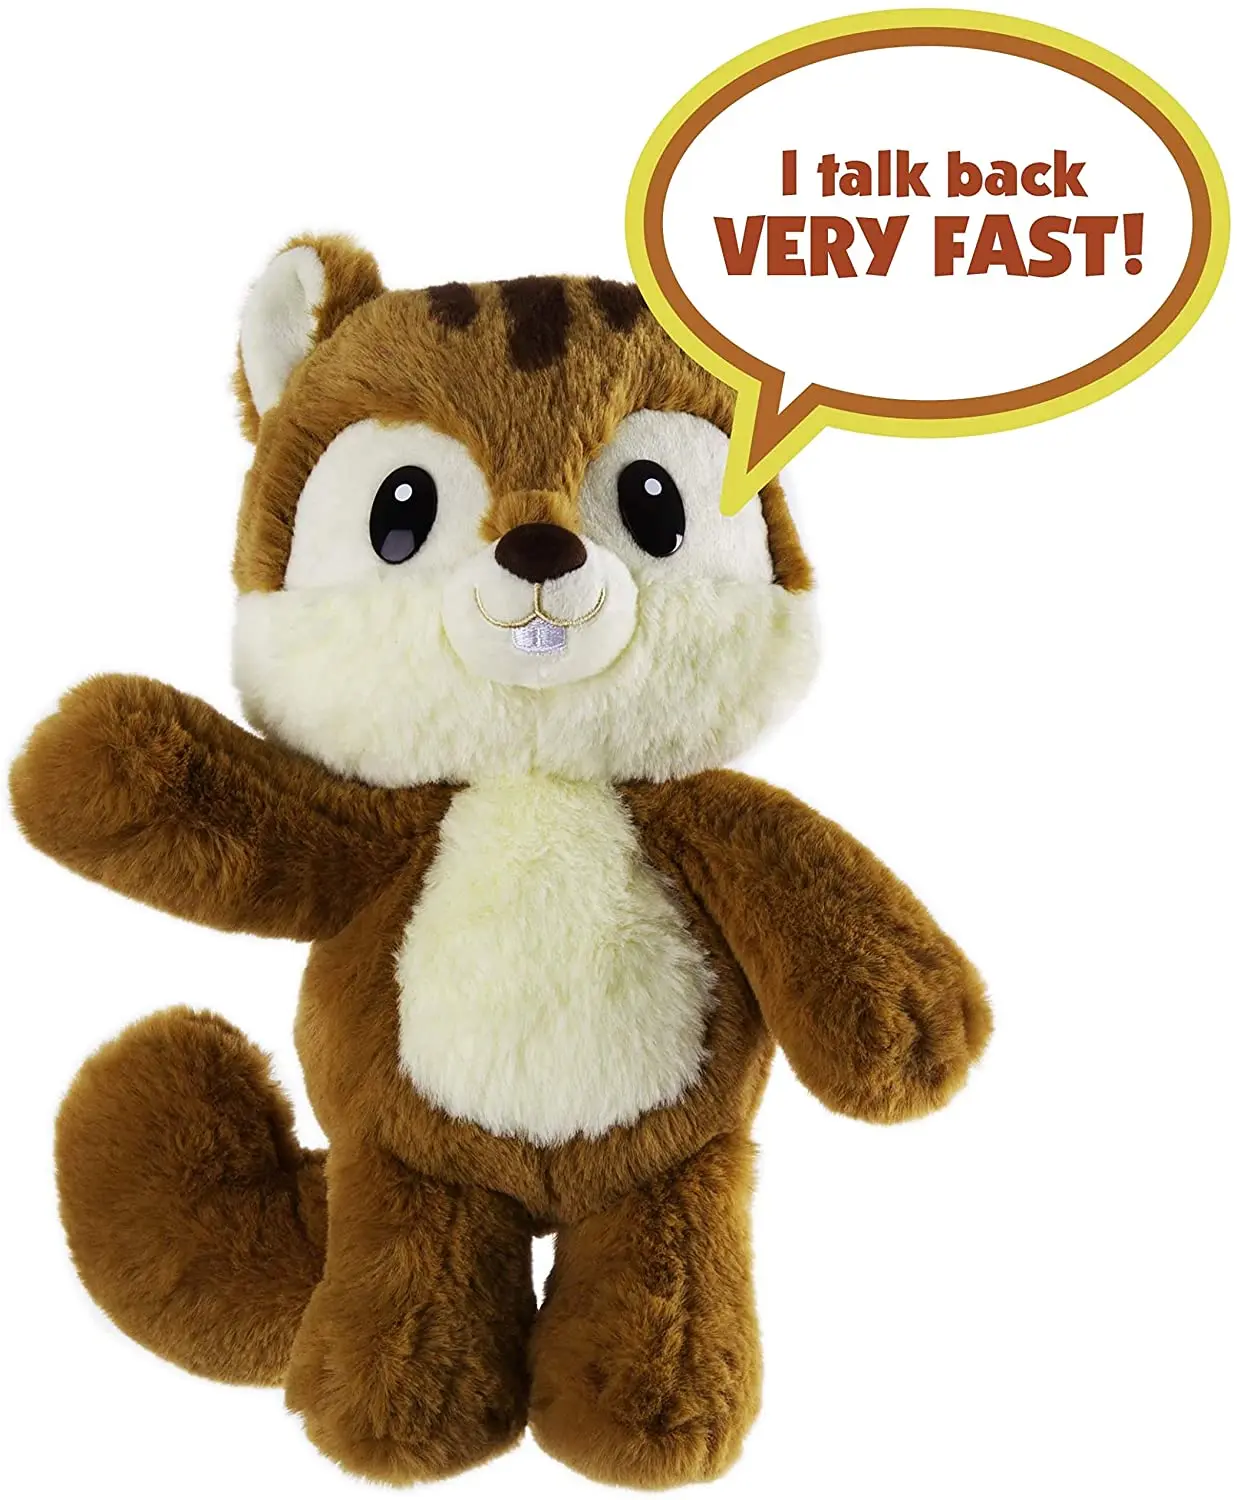 Creative Funny Repeat Words Recording Talking Toy Digital Shaking Motion  Plush Animal Doll - Buy Best Made Toys Plush Dog Stuffed Animals,Creative  Funny Repeat Words Talking Toy,Shaking Motion Plush Animal Doll Product